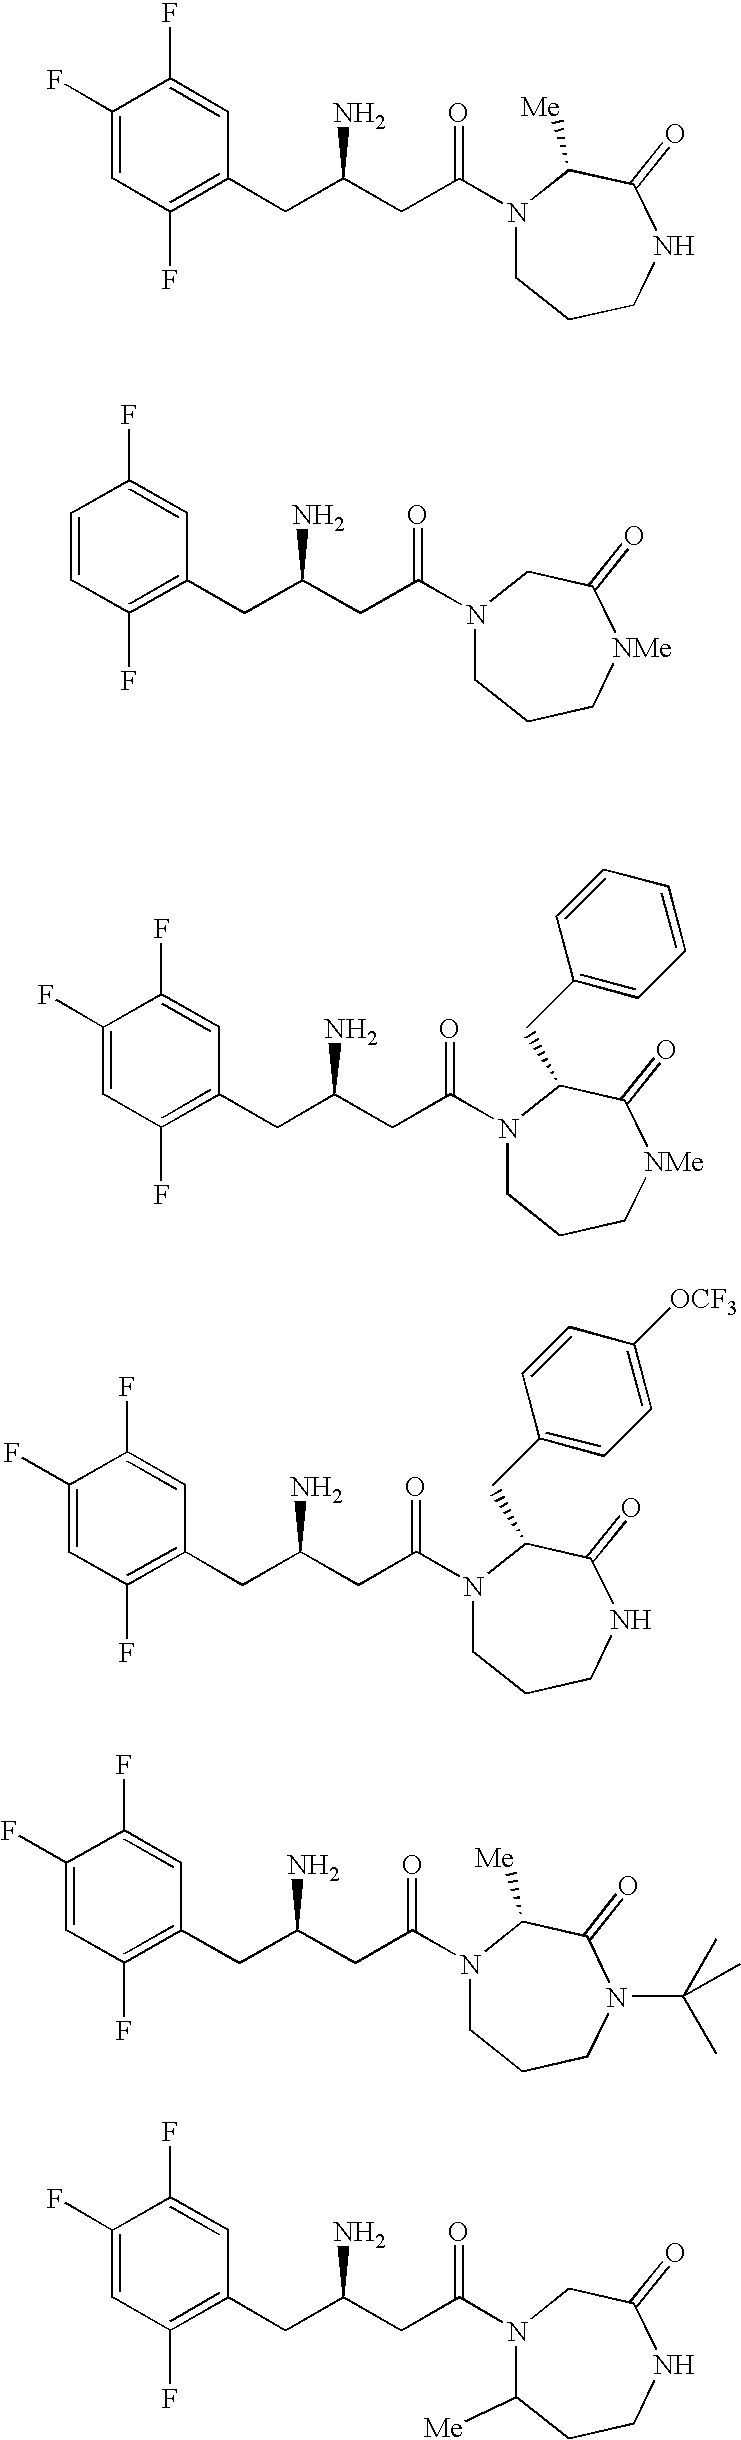 Beta-amino heterocyclic dipeptidyl peptidase inhibitors for the treatment or prevention of diabetes